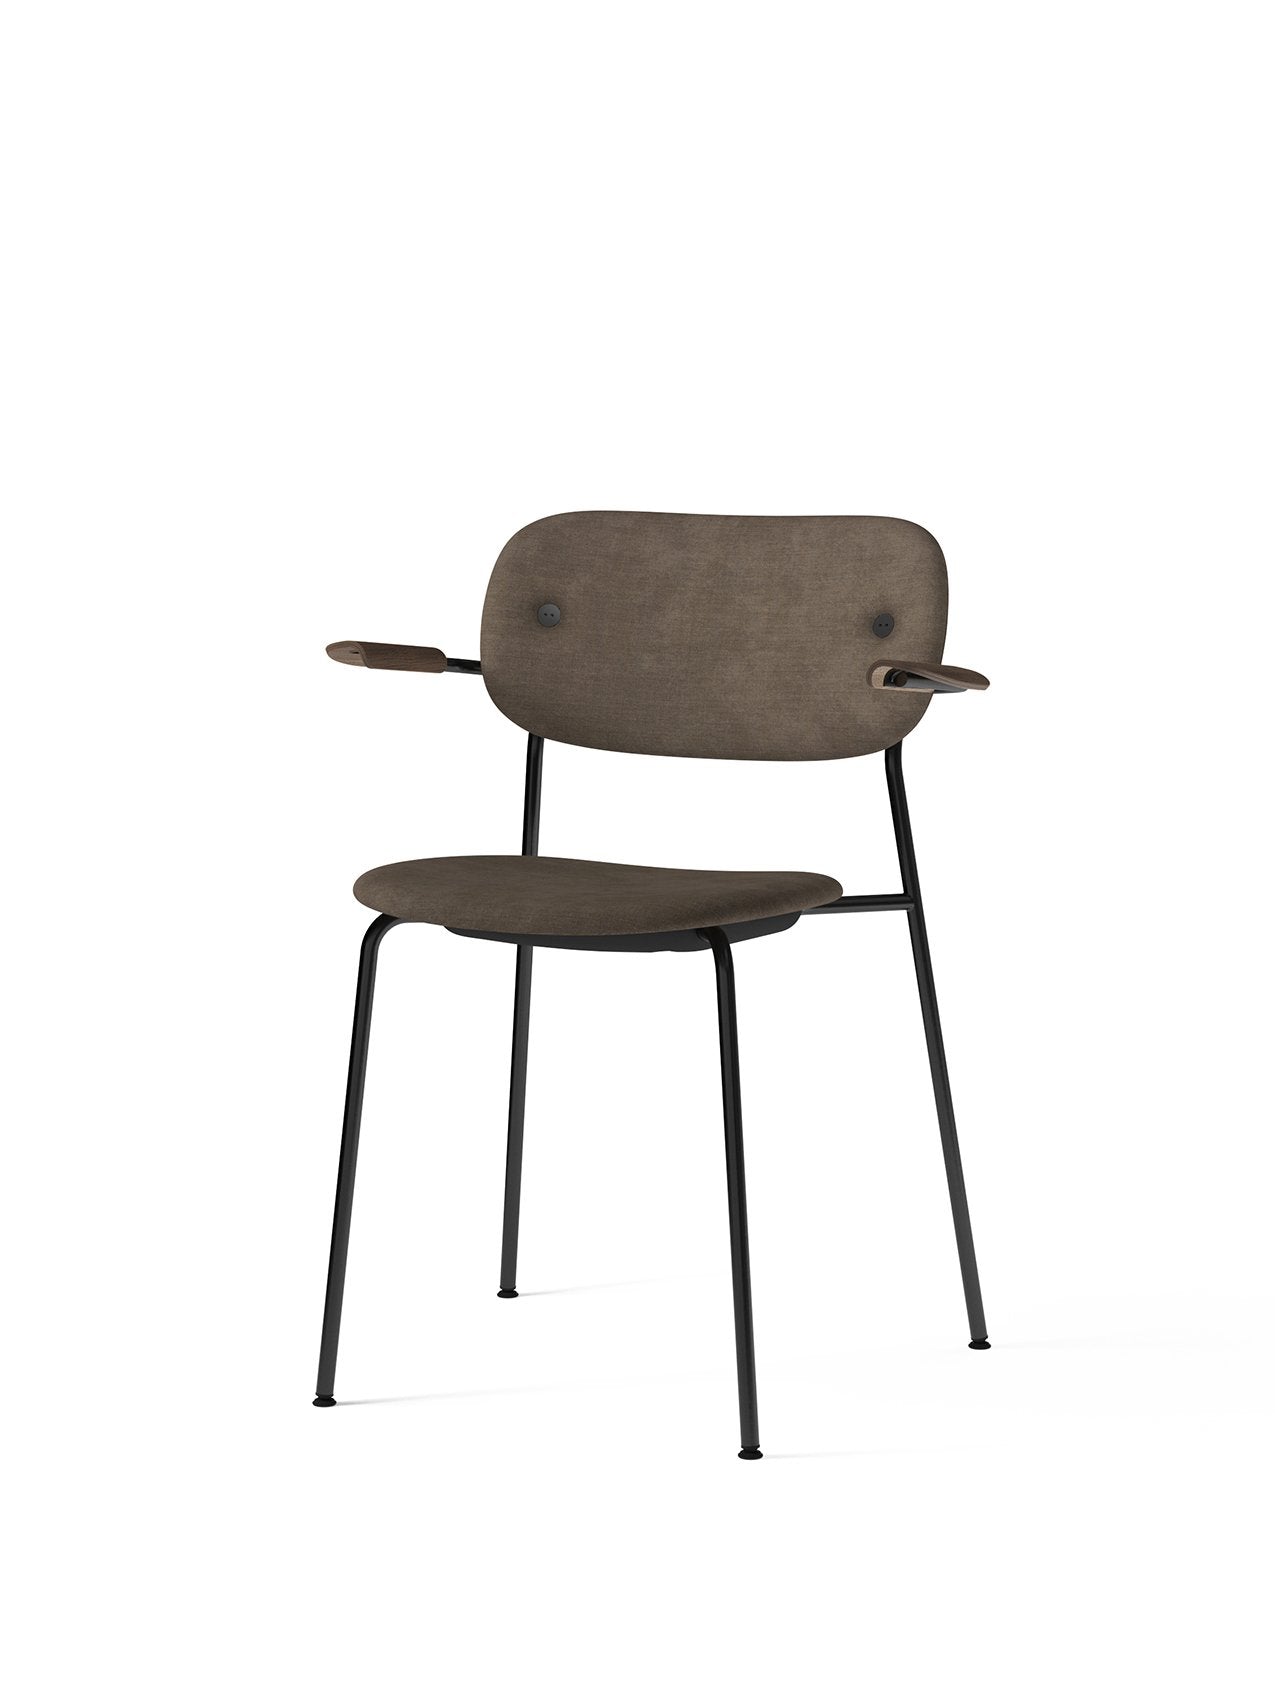 Co Chair, Fully Upholstered-Chair-Norm Architects-menu-minimalist-modern-danish-design-home-decor